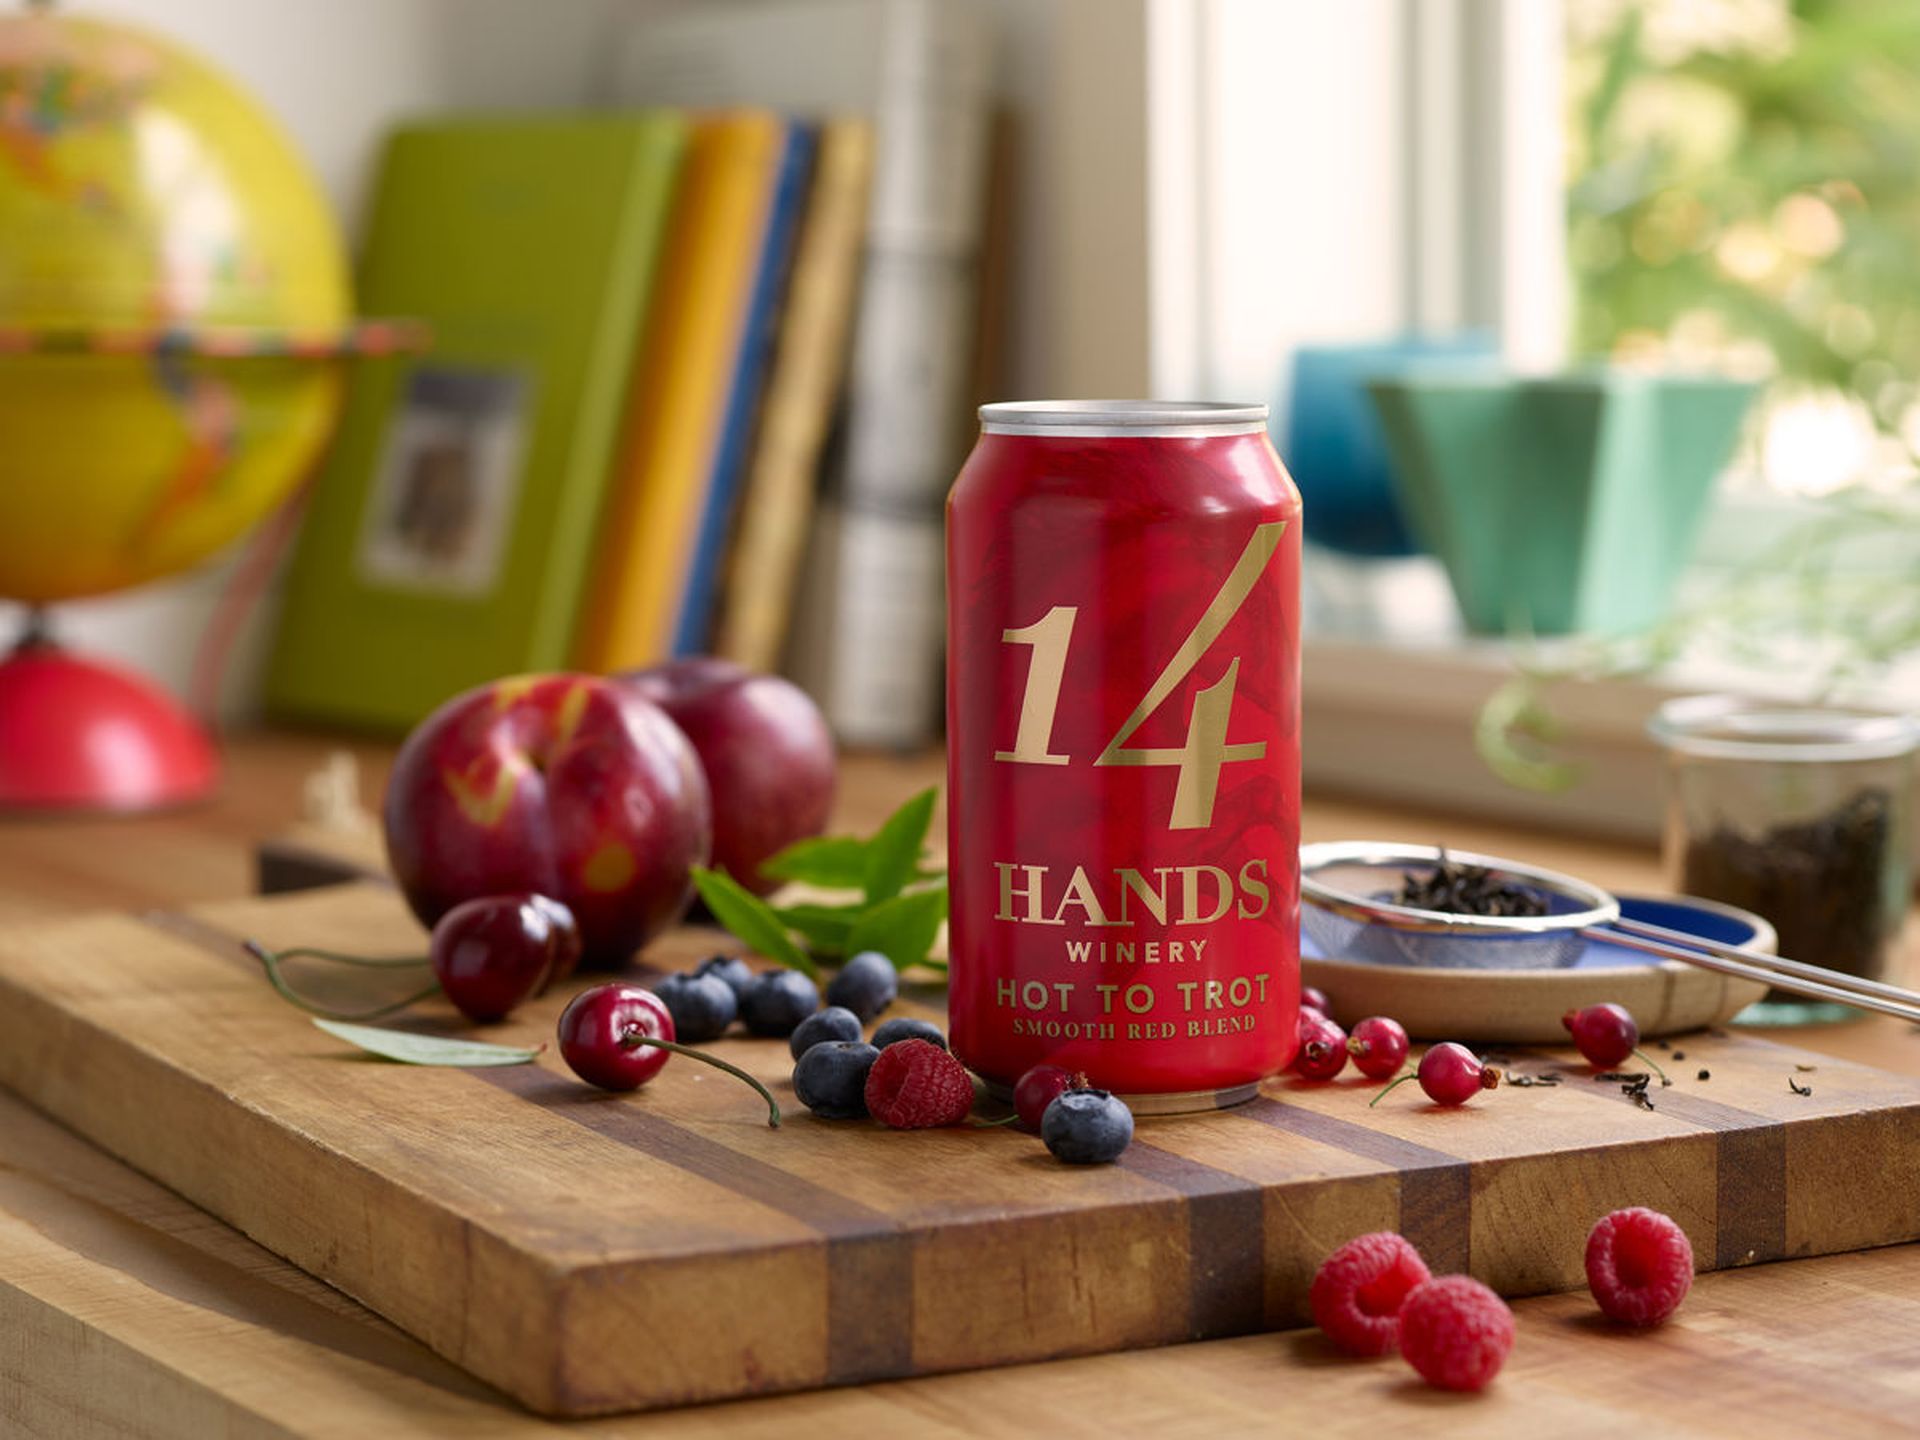 Galentine's Day 2024: Wine in a can. 14 Hands Winery Hot to Trot Red Wine Blend